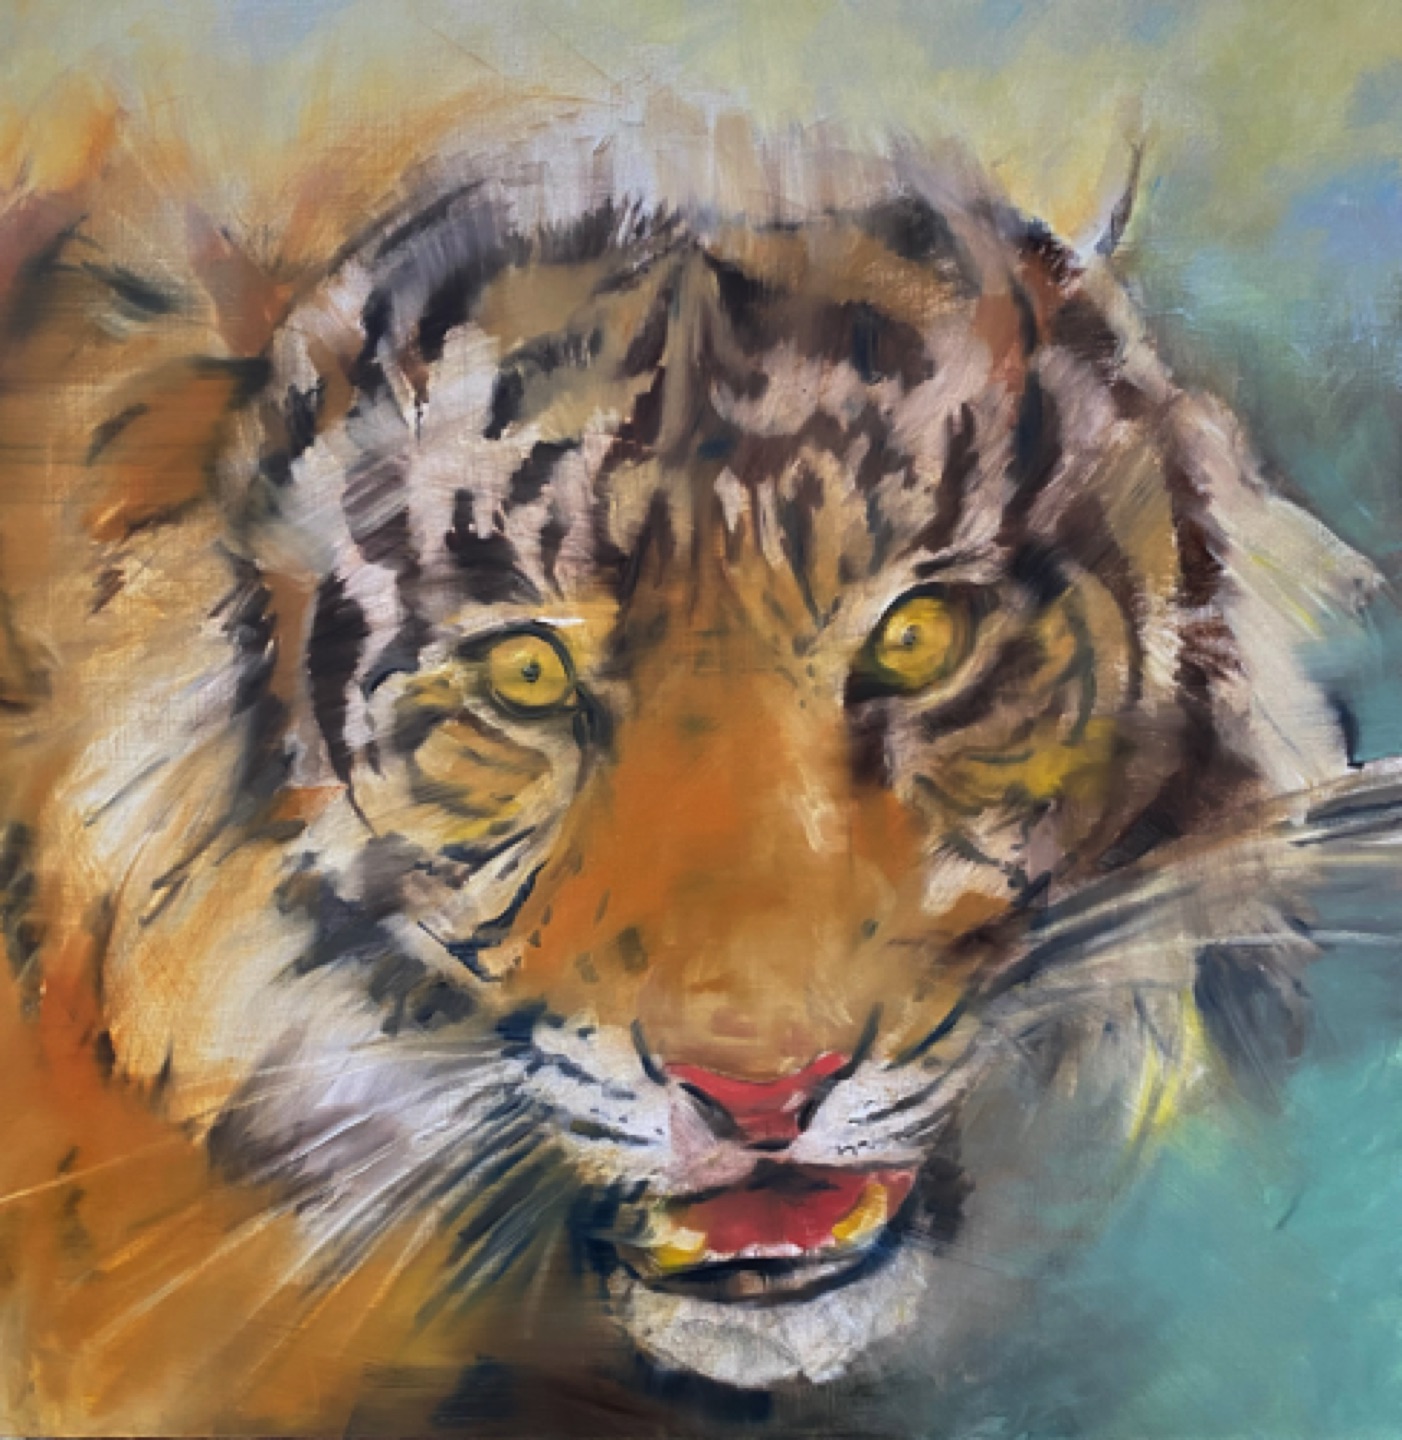 Gregg Chadwick
Year of the Tiger (Sumatran Tiger - CJ)
40”x40” oil on linen 2022
Exhibited and Sold at Los Angeles Zoo's Beastly Ball May 2022